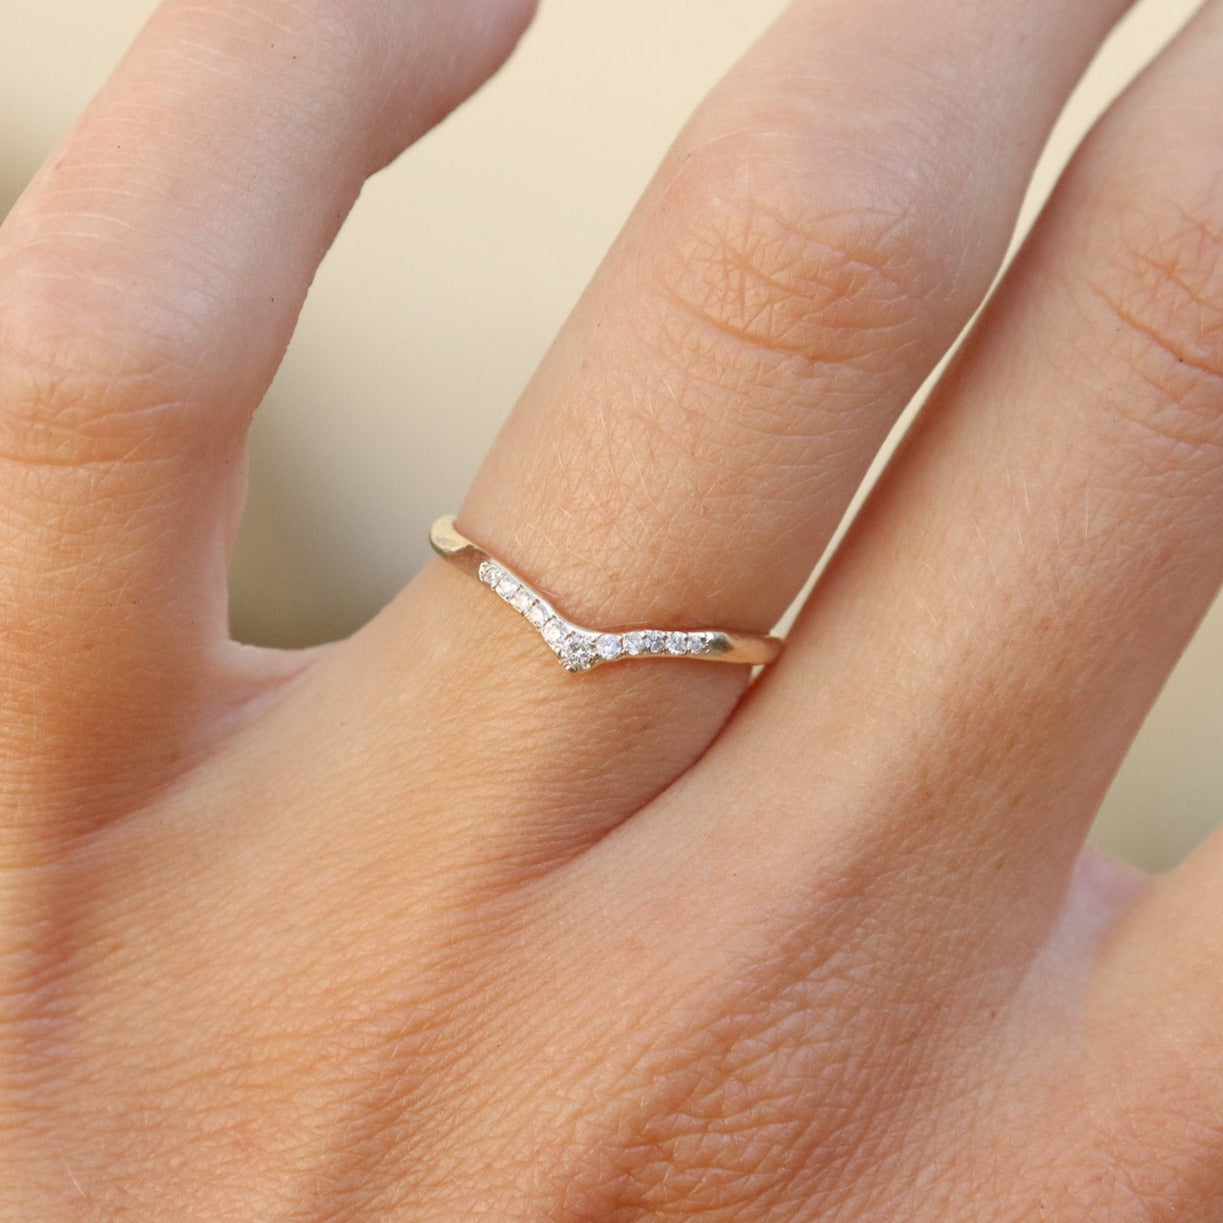 A pave diamond curved stacking band in 14k yellow gold is worn on a ring finger.